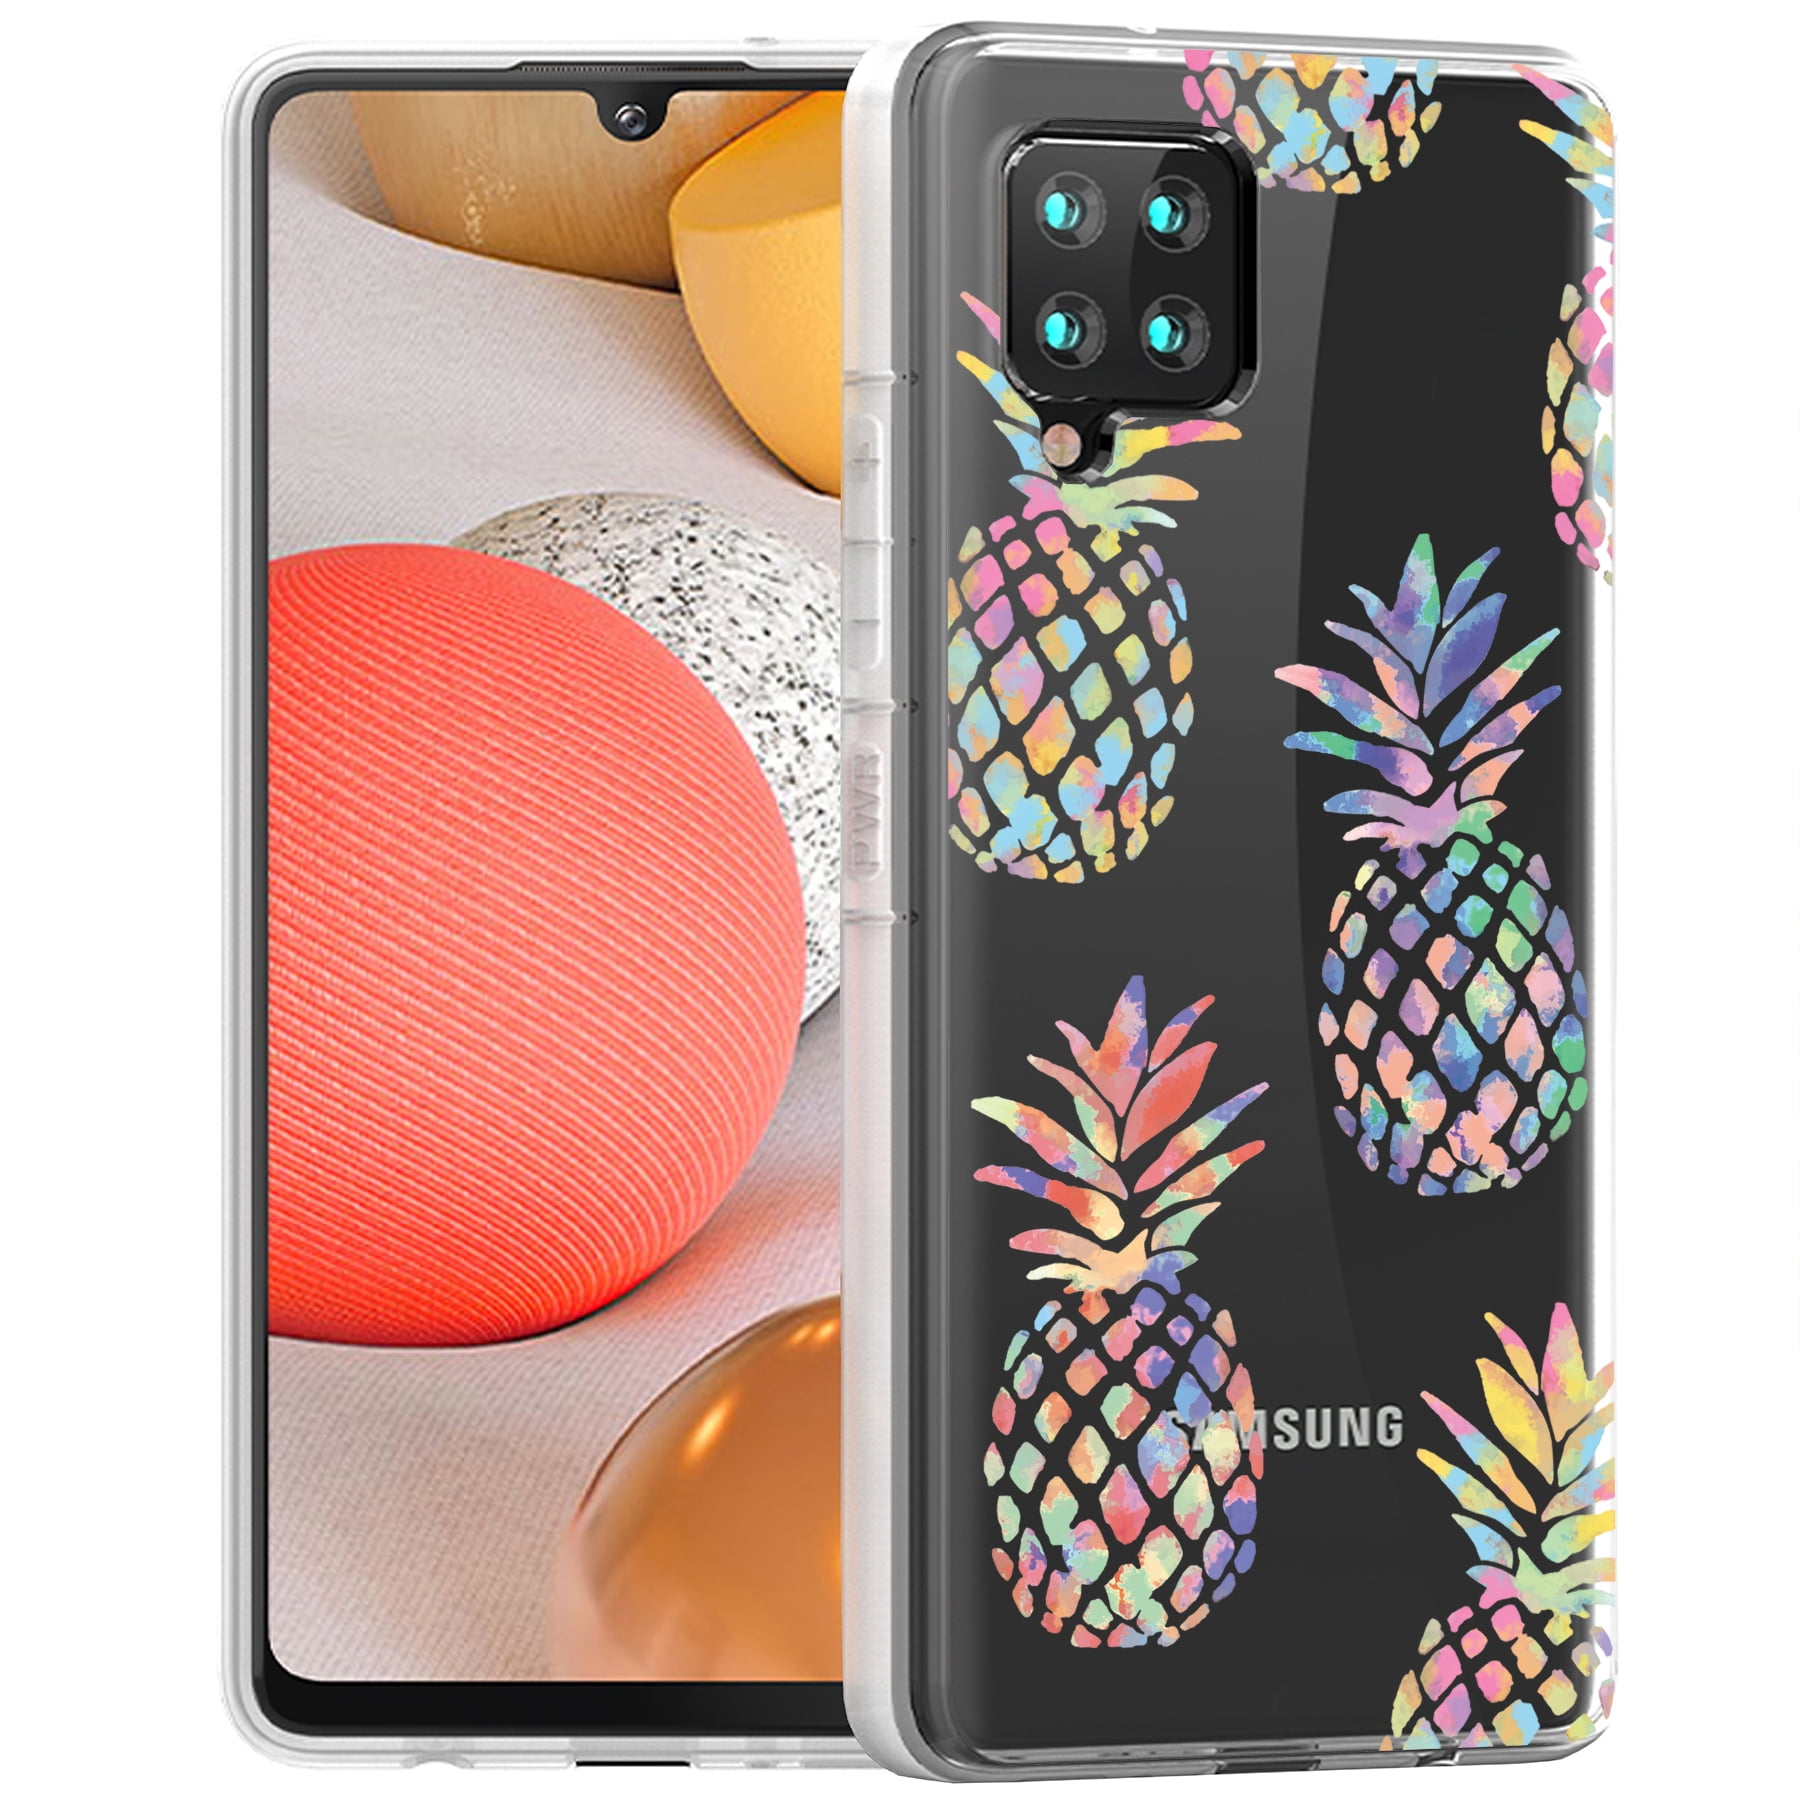 Light Weight Flexible Anti-Scratch,USA Thin Gel Cover Color Pineapple Print TalkingCase Slim Case for Samsung Galaxy Note 20 Ultra